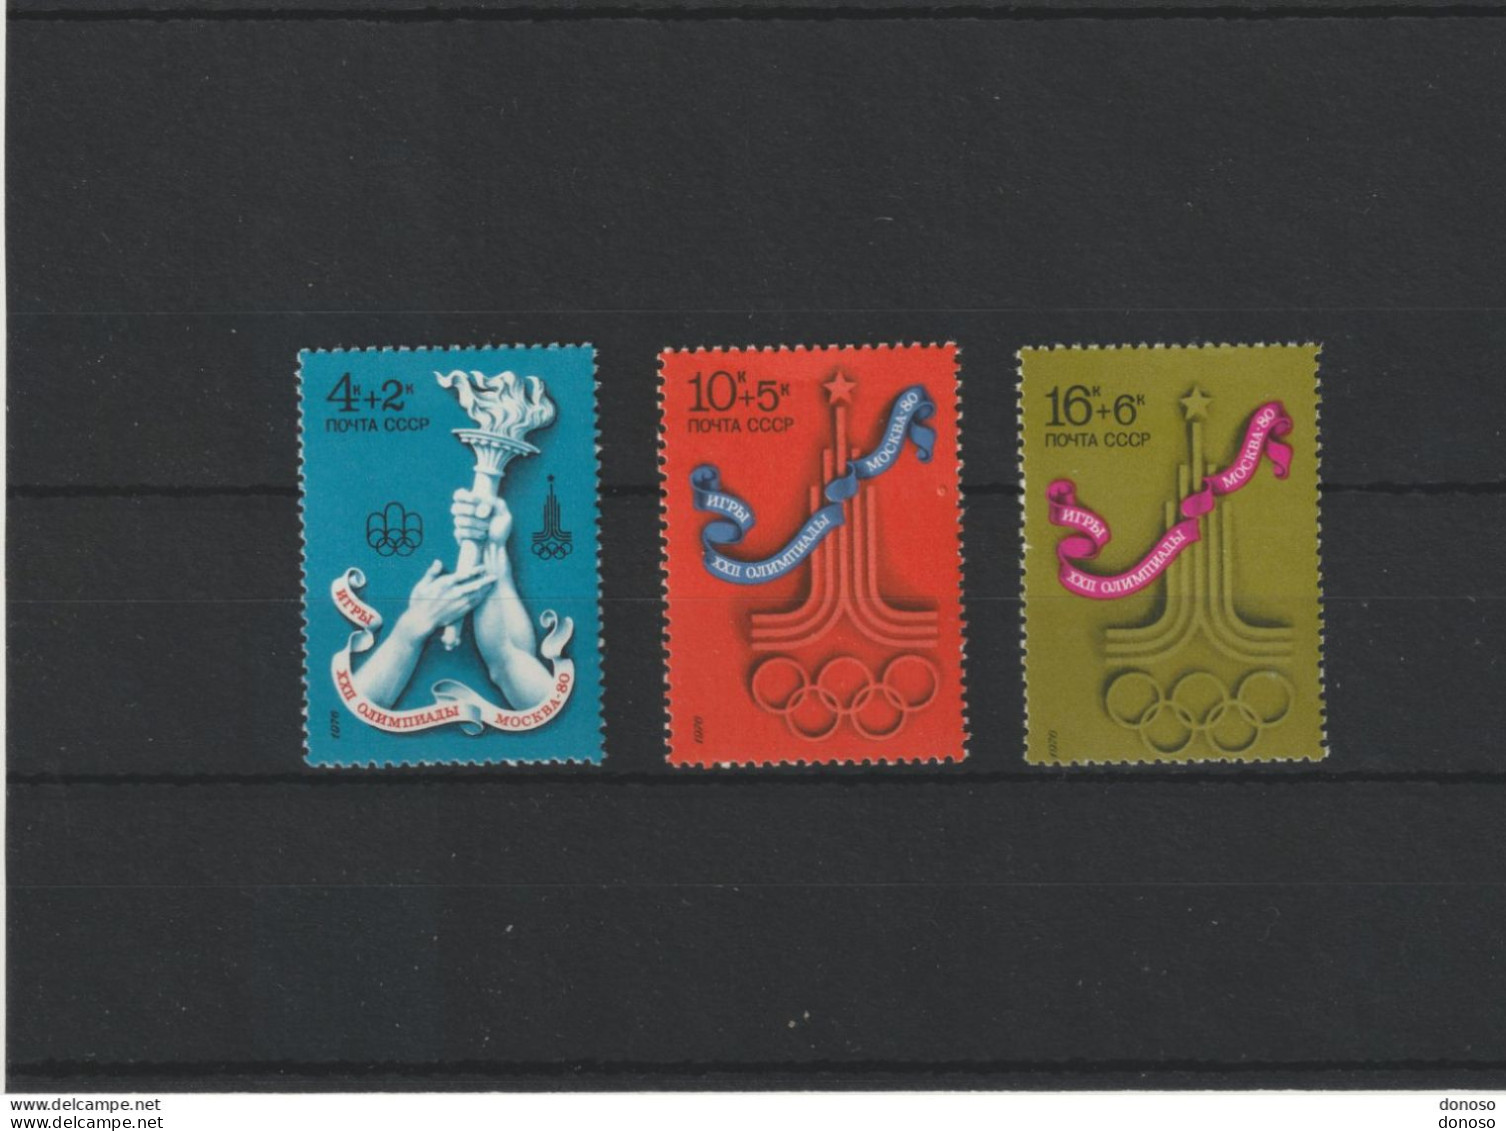 URSS 1976 JEUX OLYMPIQUES DE MOSCOU I Yvert 4339-4341, Michel 4563-4565 NEUF** MNH - Unused Stamps